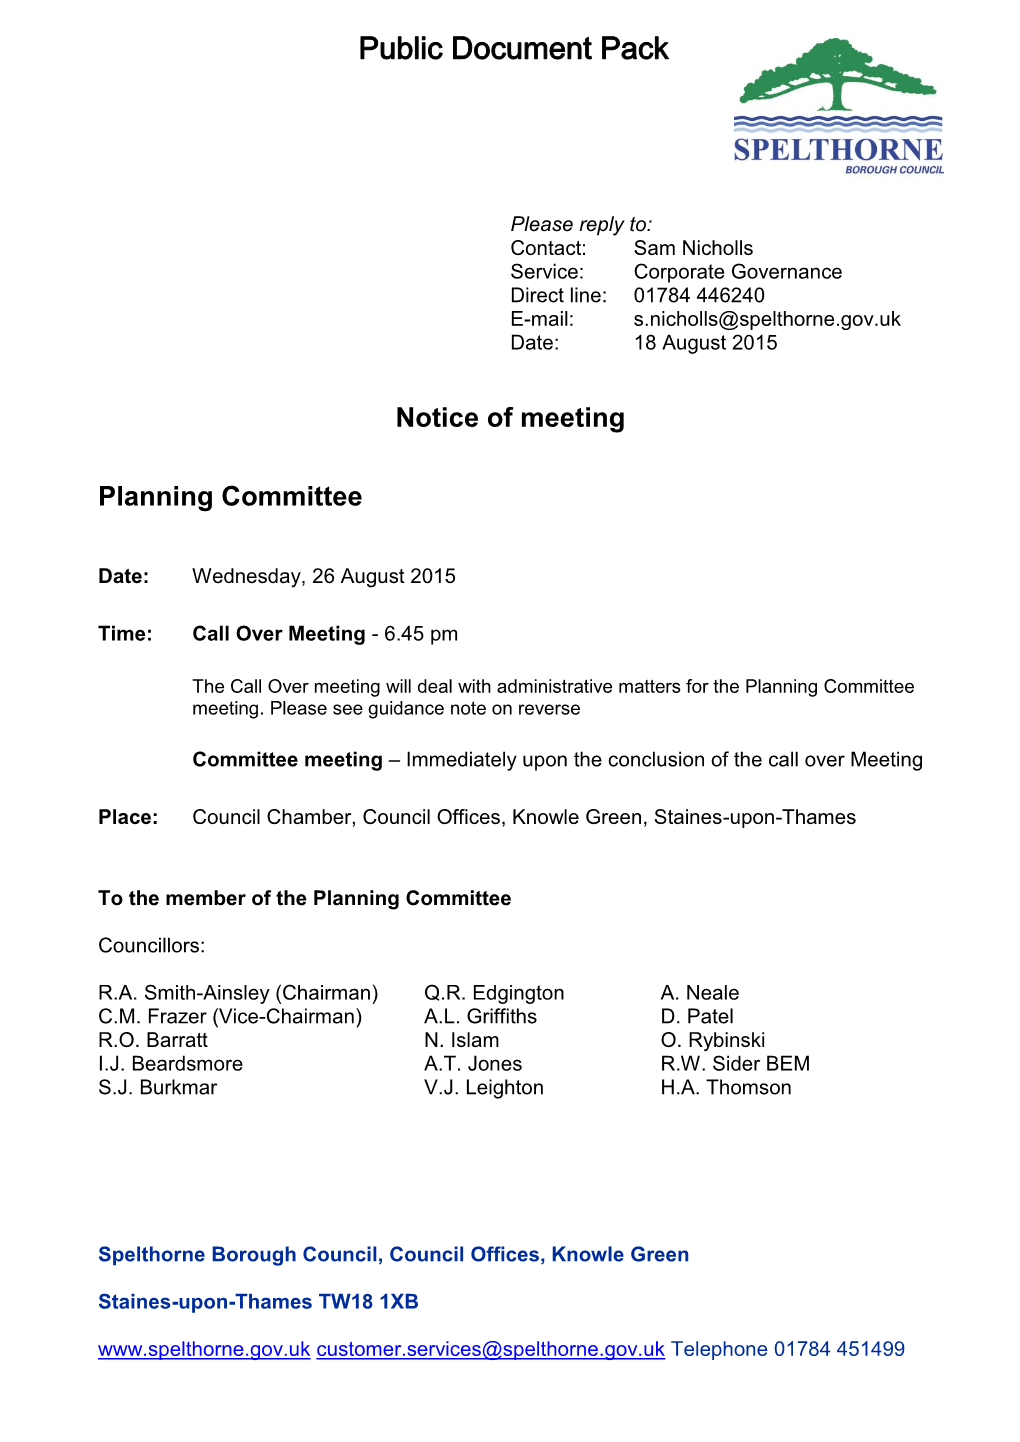 (Public Pack)Agenda Document for Planning Committee, 26/08/2015